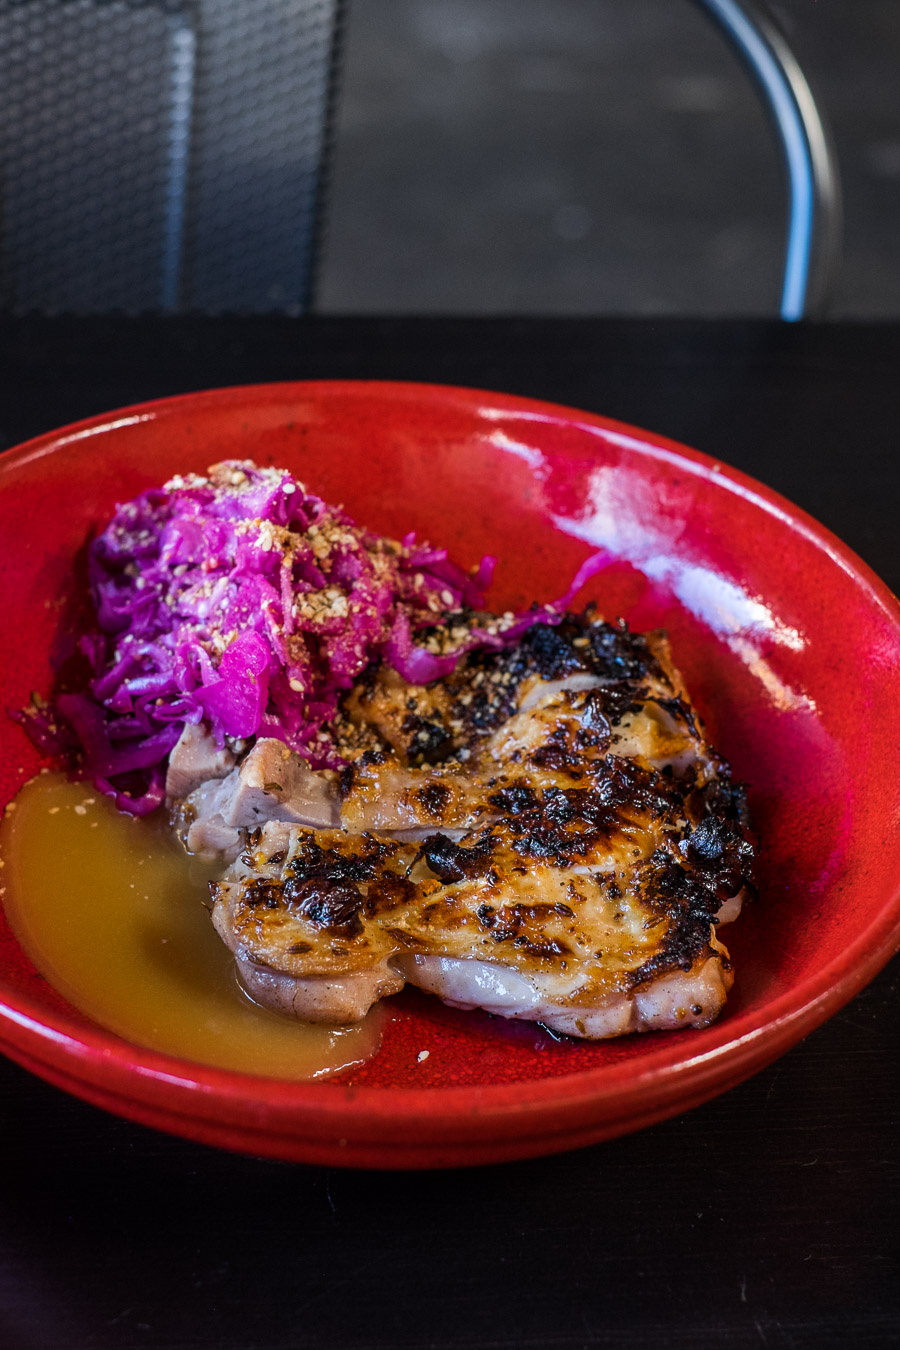 Wood-roasted chicken pieces, red cabbage, miso sauce (AU$21)